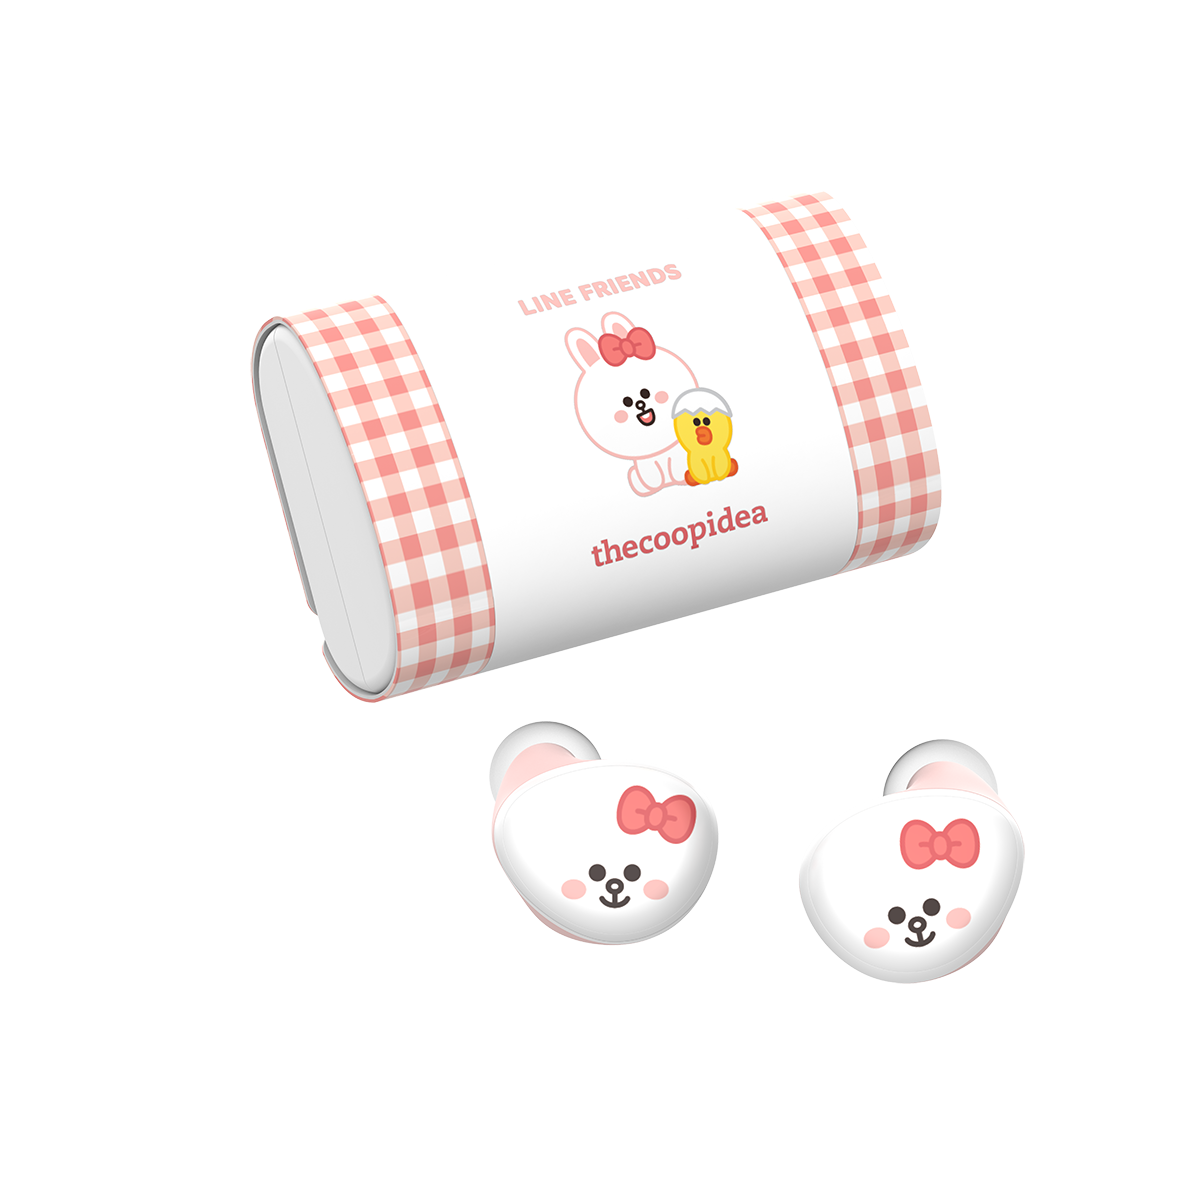 LINE FRIENDS MEETS thecoopidea BEANS+ True Wireless Earbuds - MINI CONY